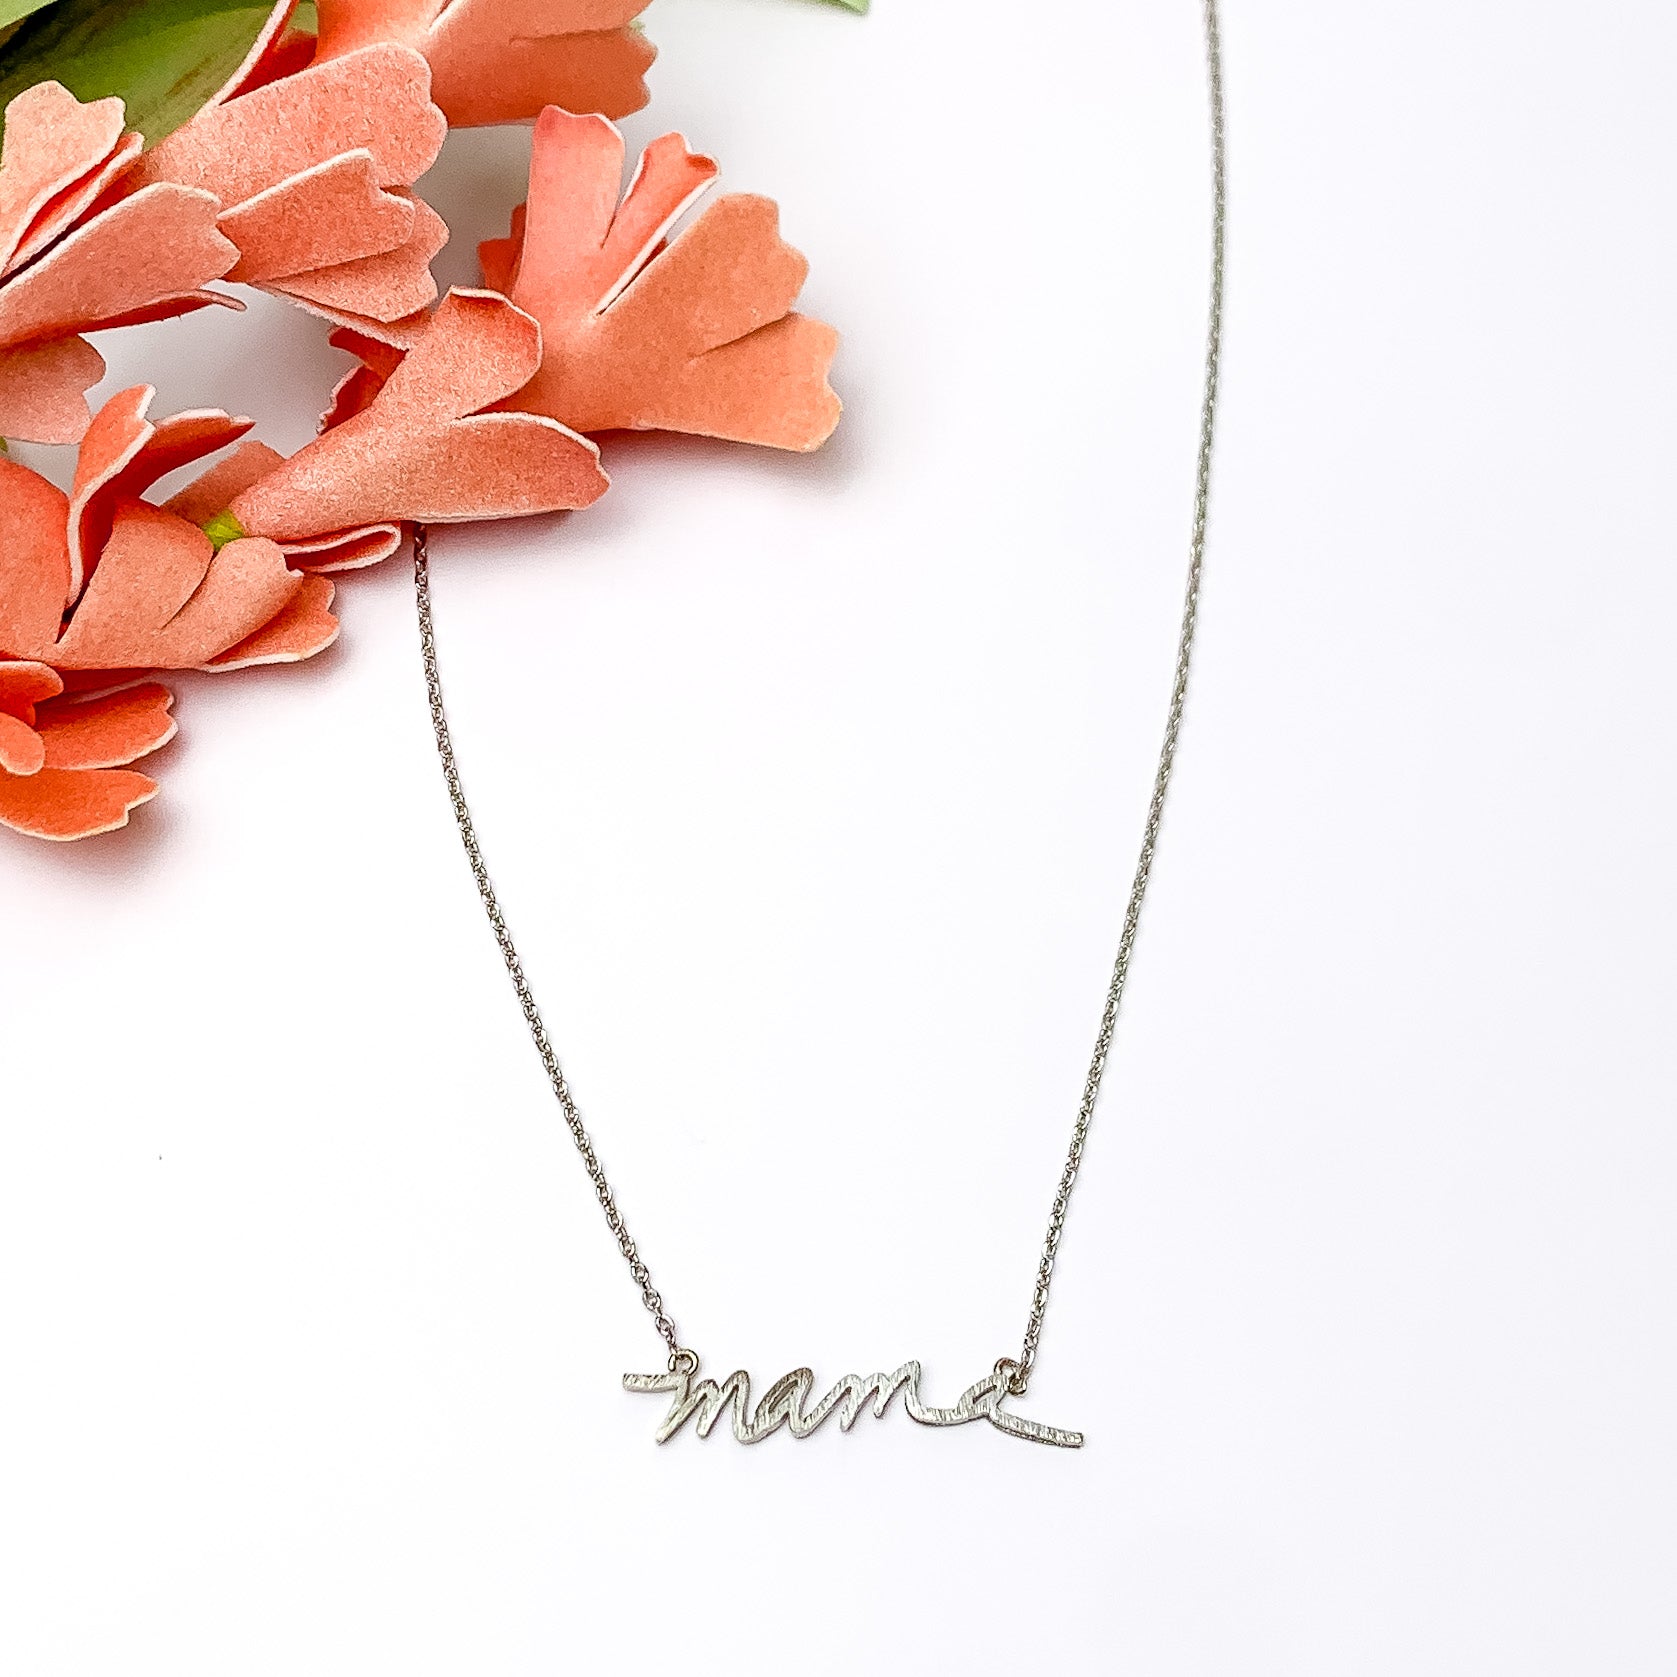 Mama chain necklace in silver tone. Pictured on a white background with flowers in the top left.